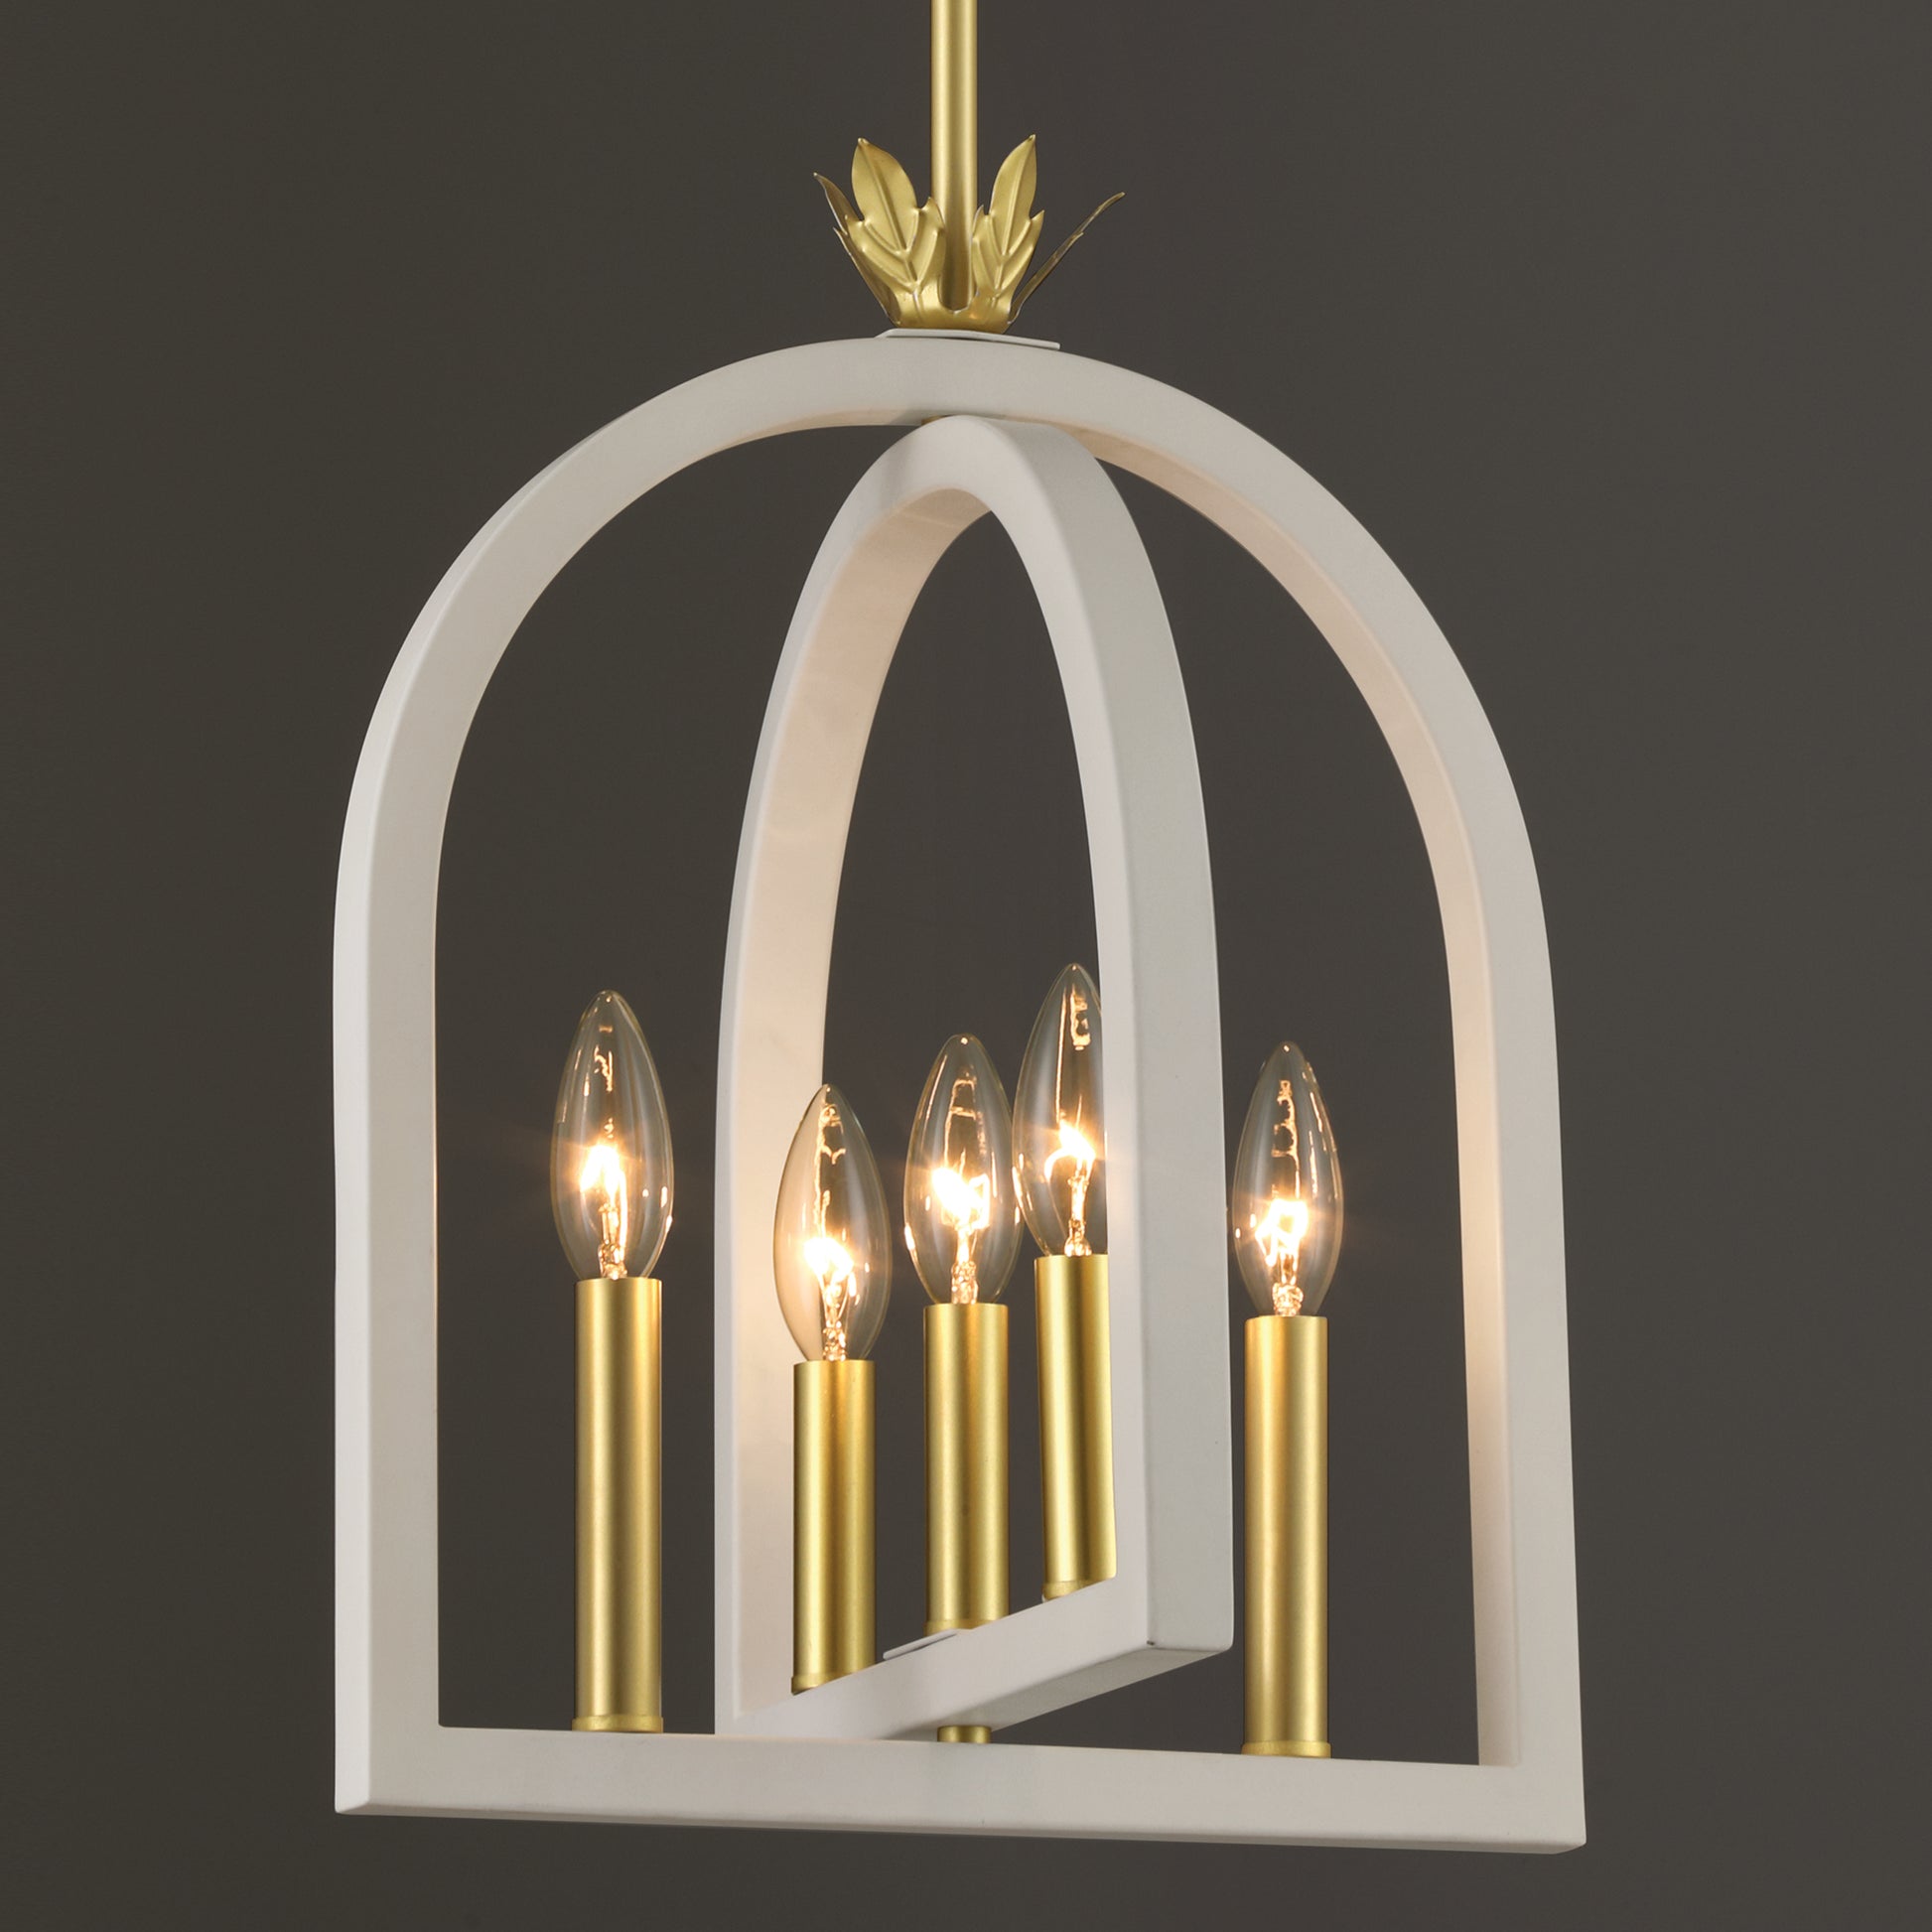 5 light empire lantern chandelier (9) by ACROMA